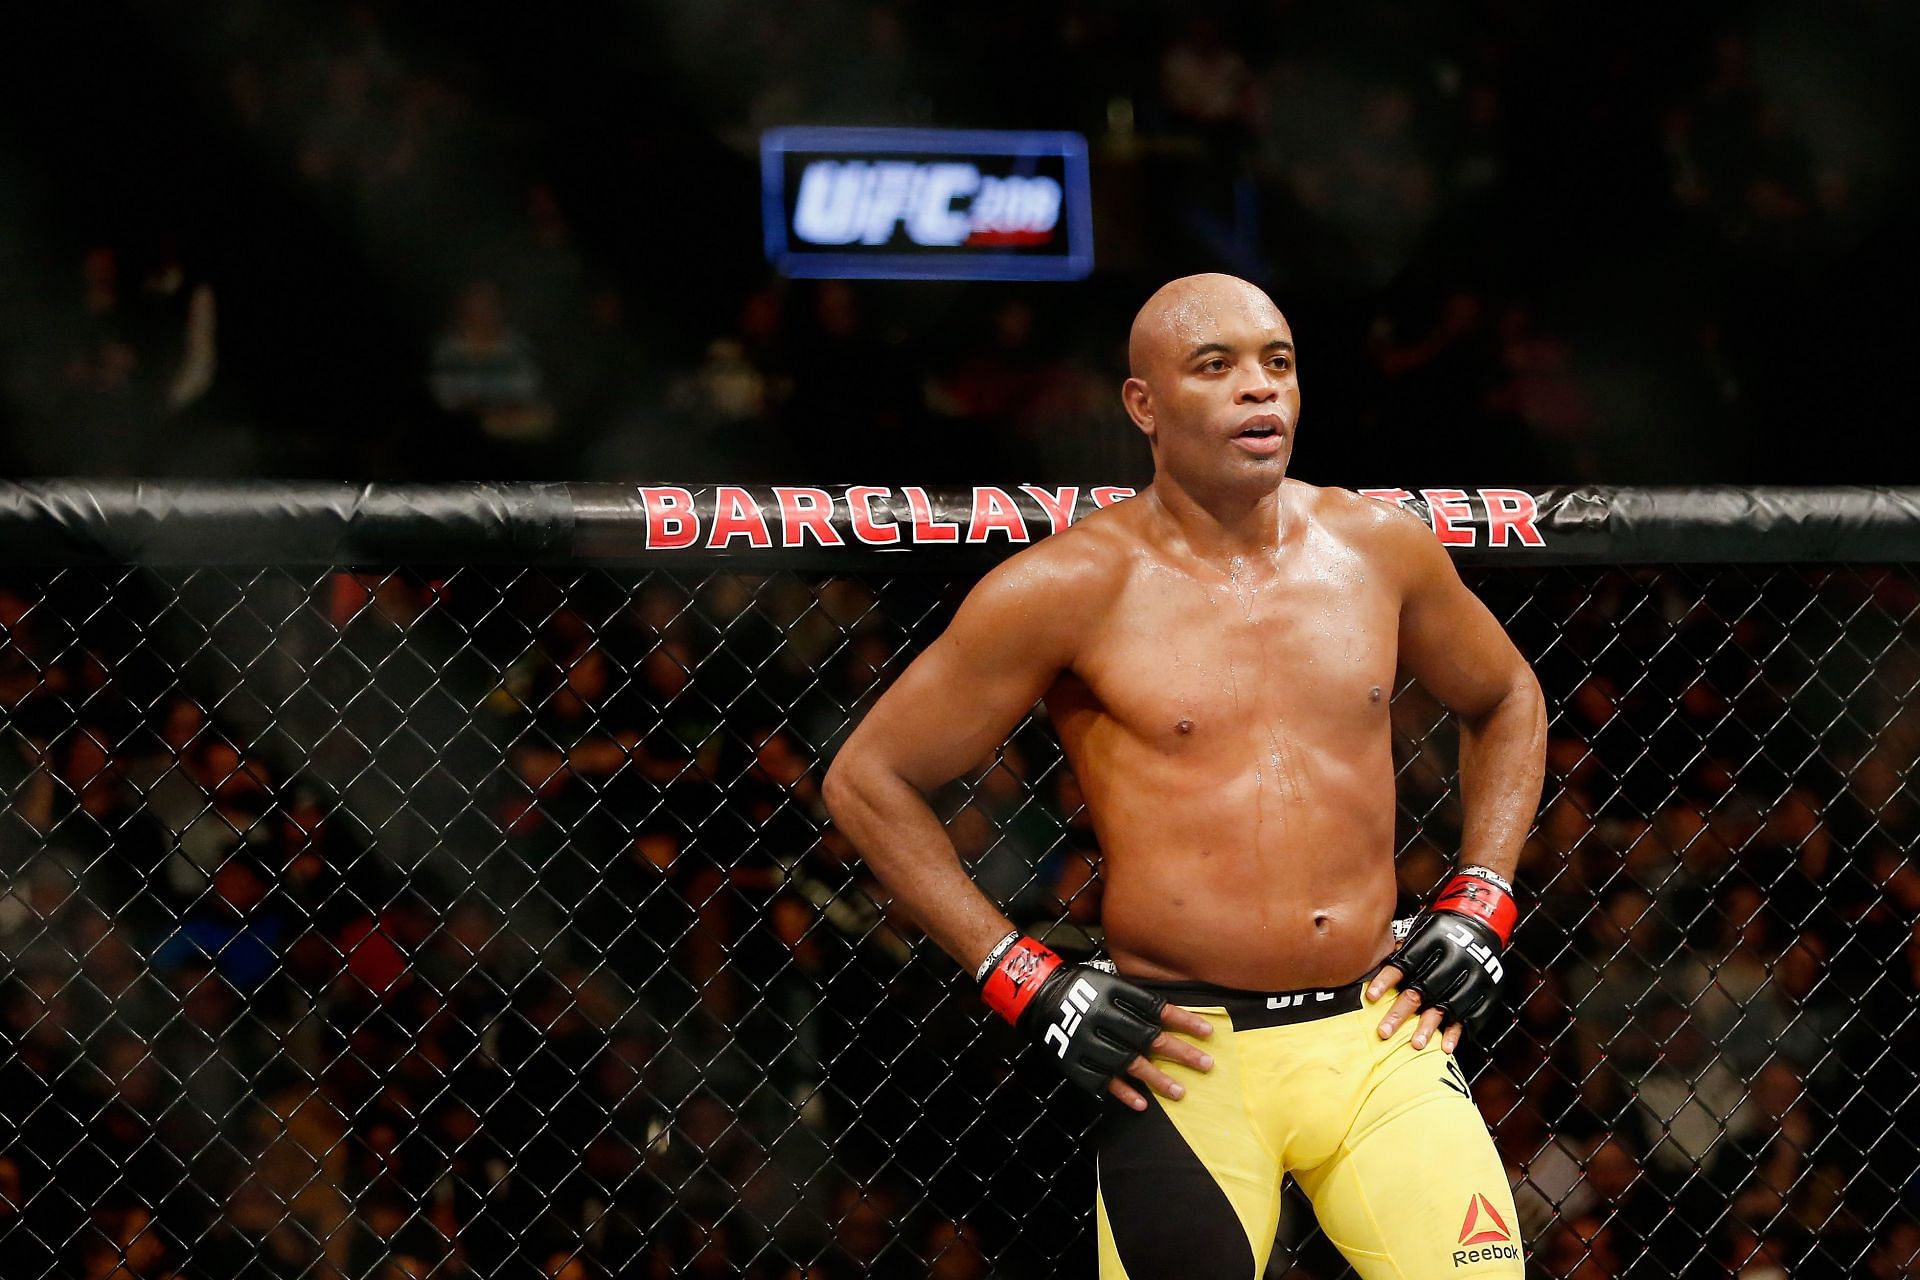 Anderson Silva popularised the front kick as a weapon with his finish of Vitor Belfort